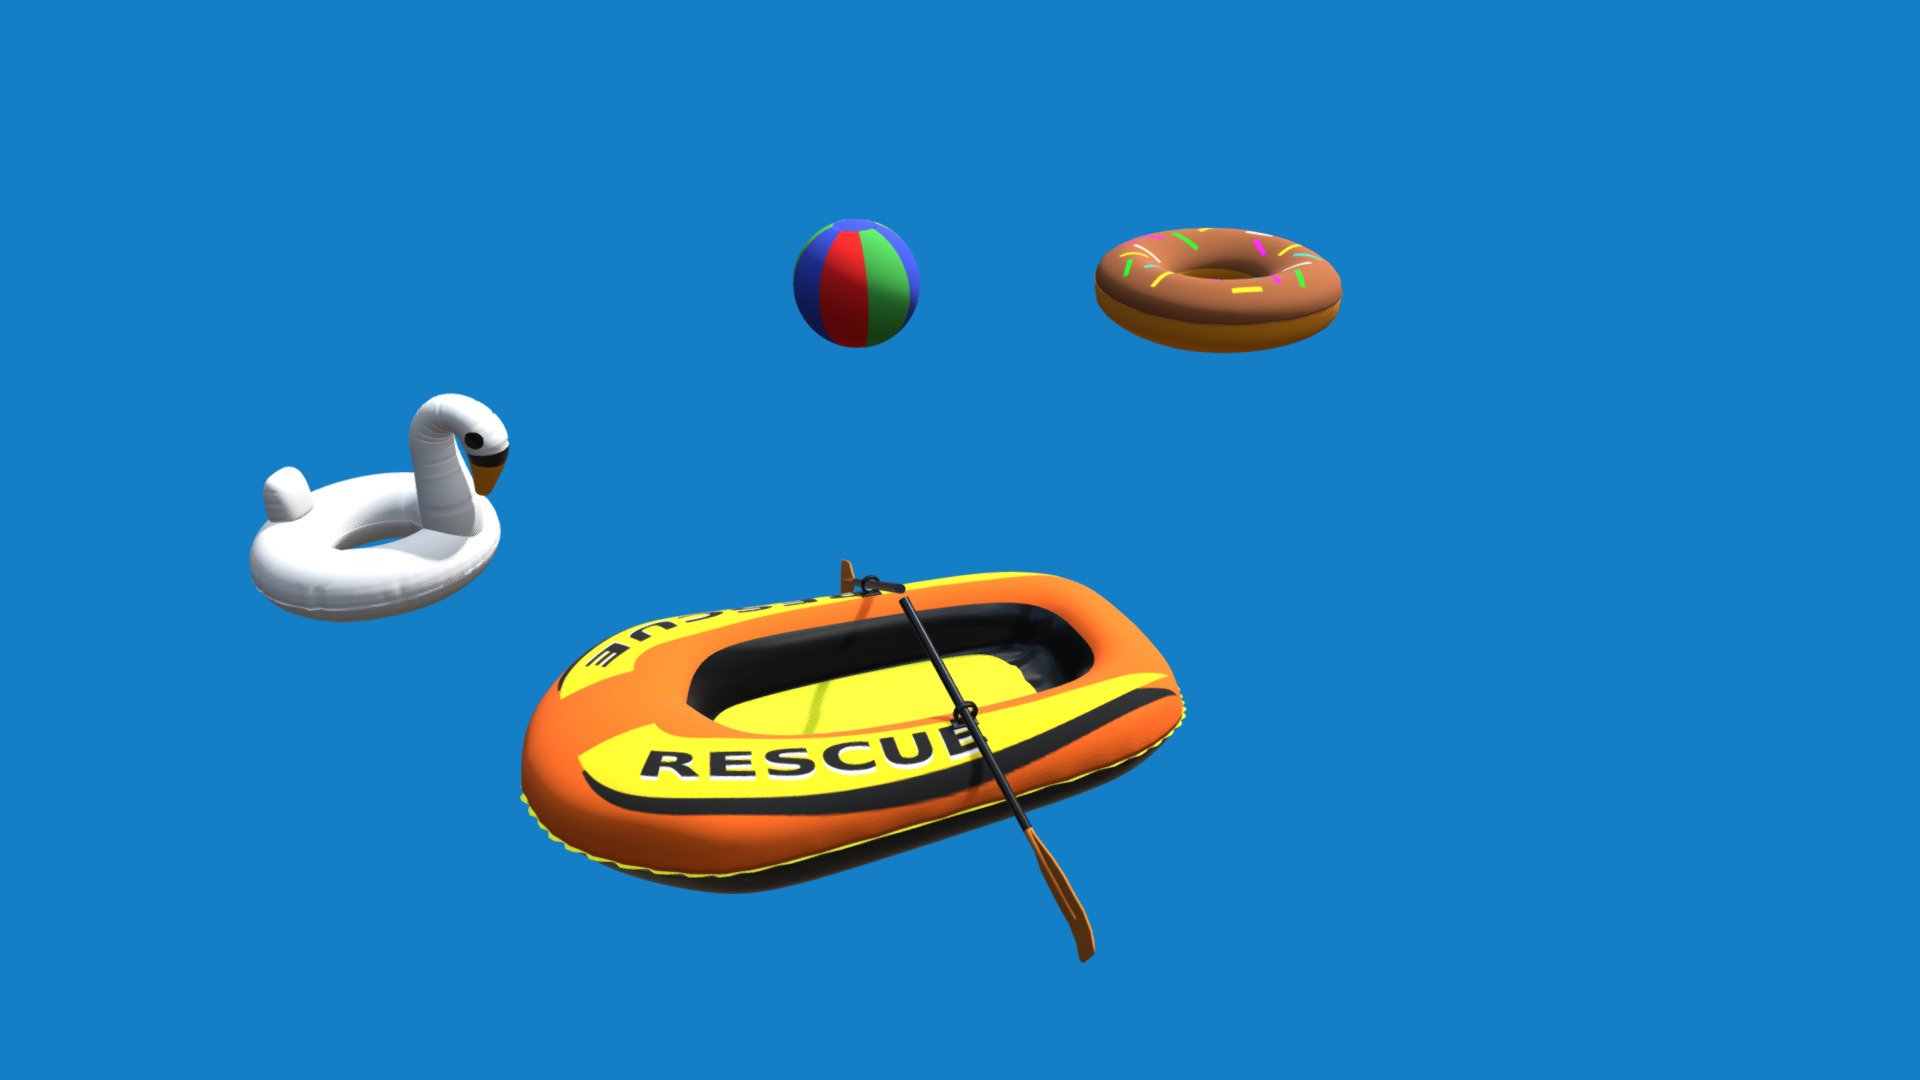 I have some assorted inflatable pool toys, included is a boat with paddles, swan, ball and donut 3d model